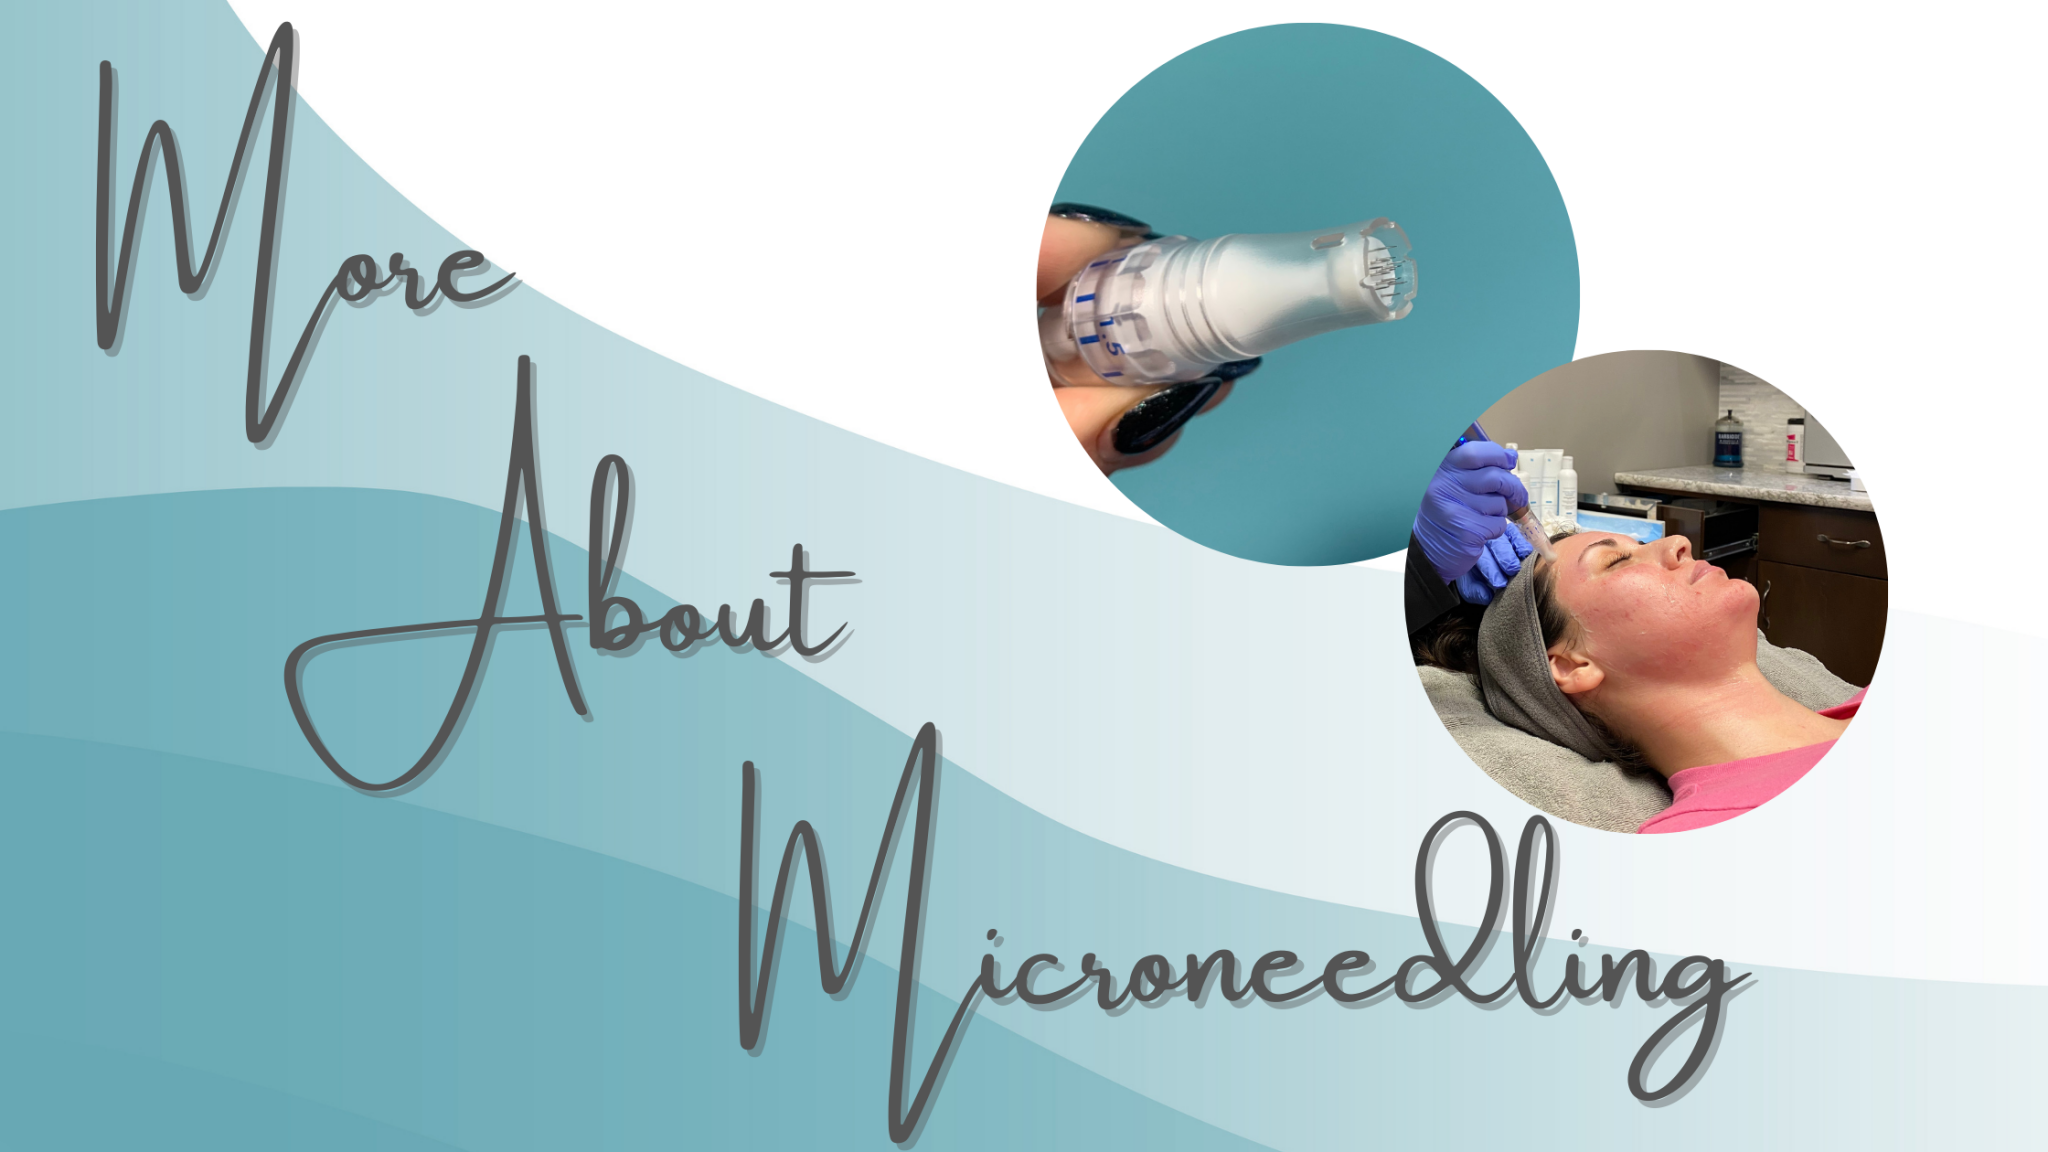 More About Microneedling